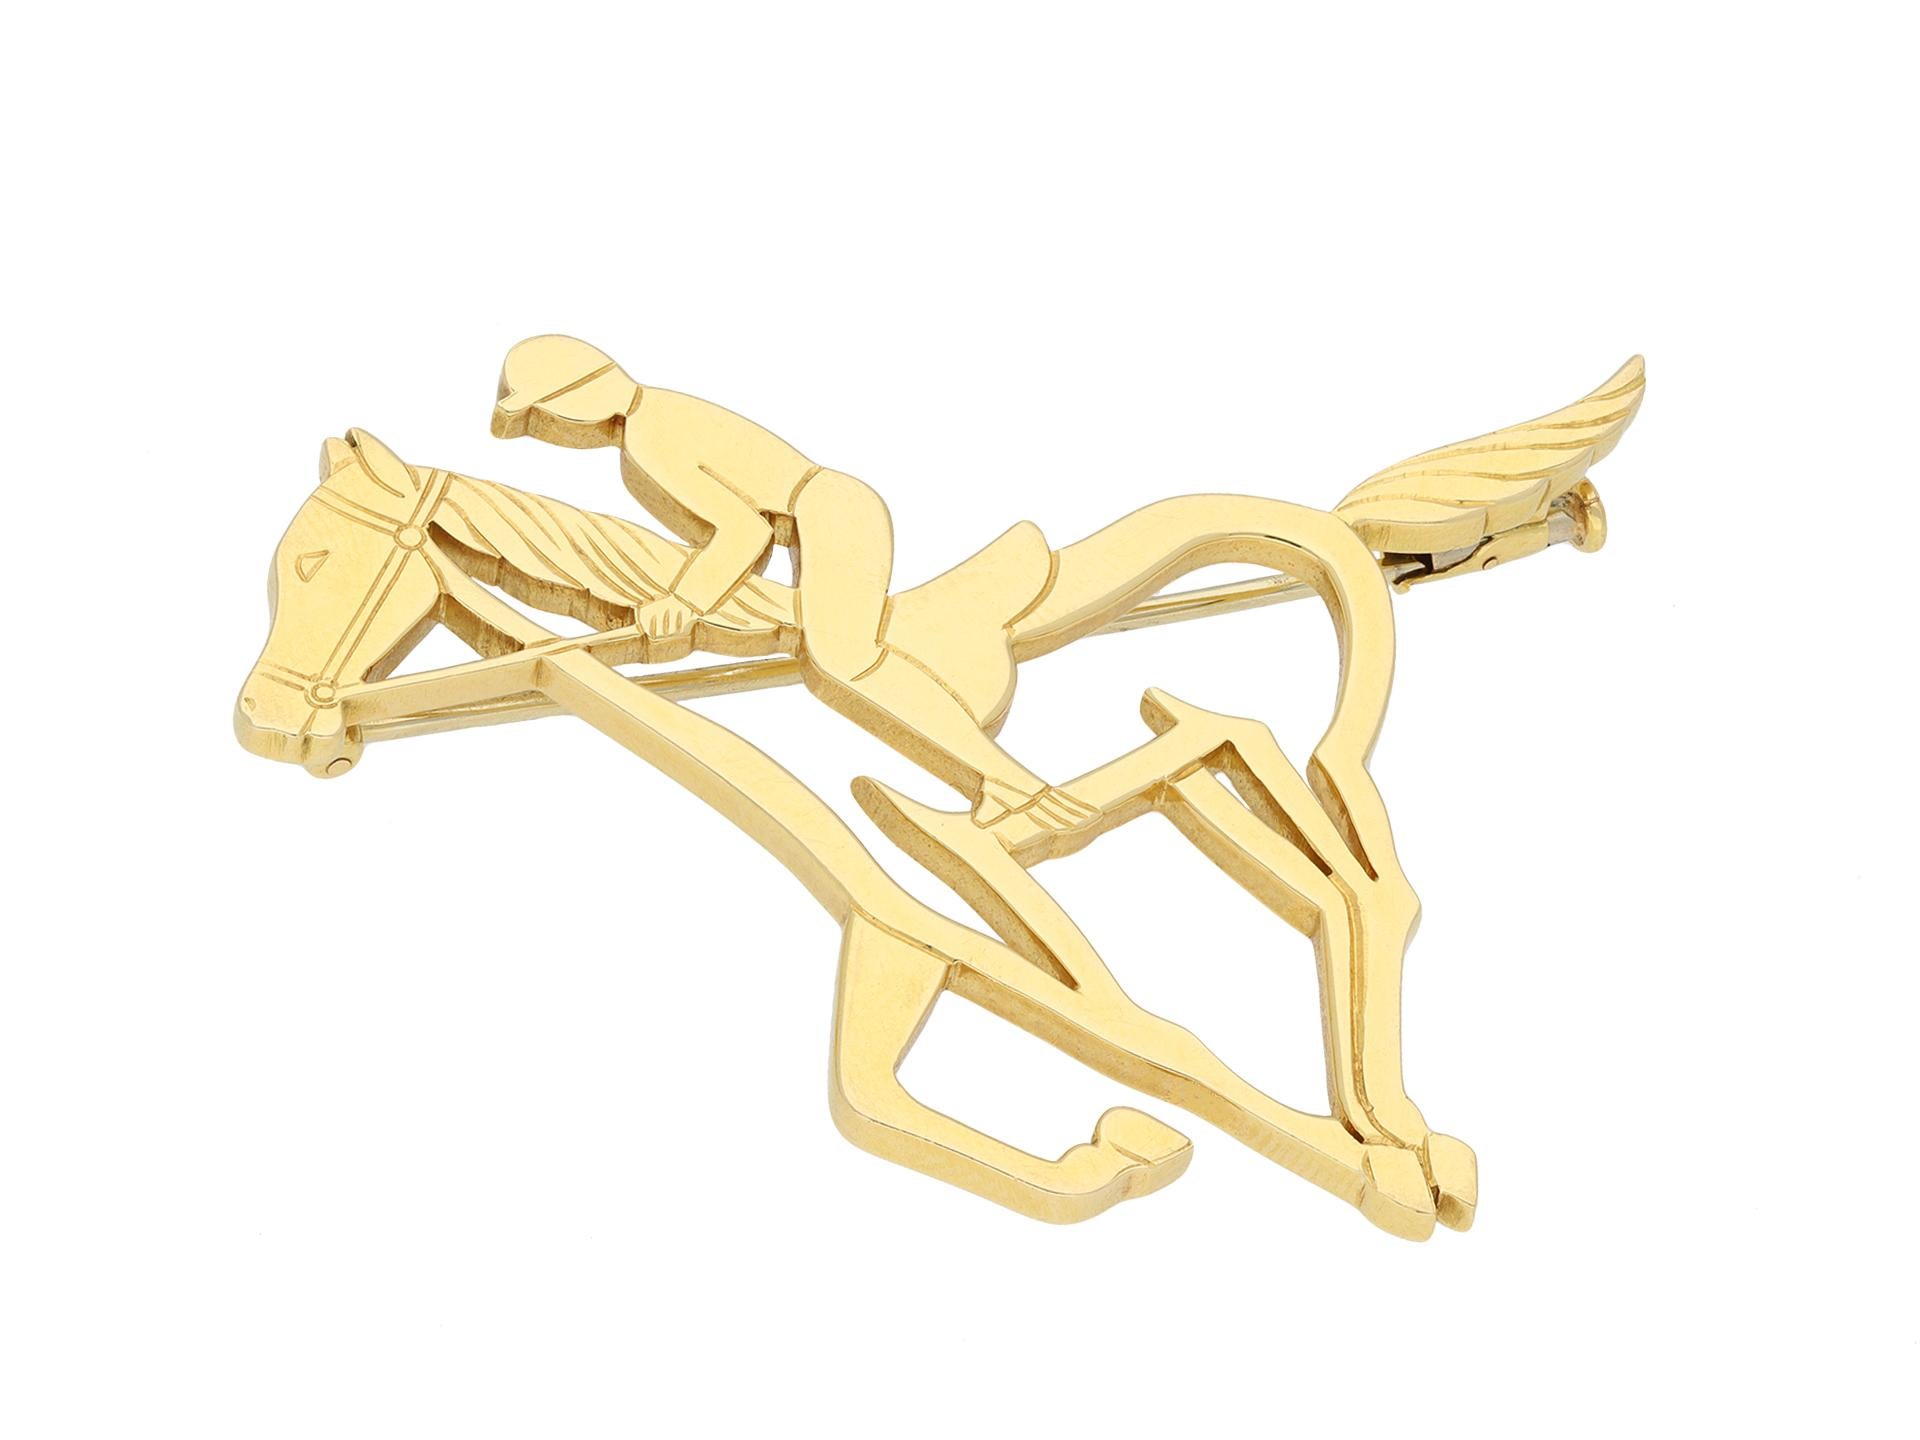 André Vassort gold horse brooch. A yellow gold brooch in the form of a horse and rider featuring intricate openwork with carved details and polished edging, the reverse mounted with a secure hinged pin fitting, approximately 4.5 cm in height. Marked